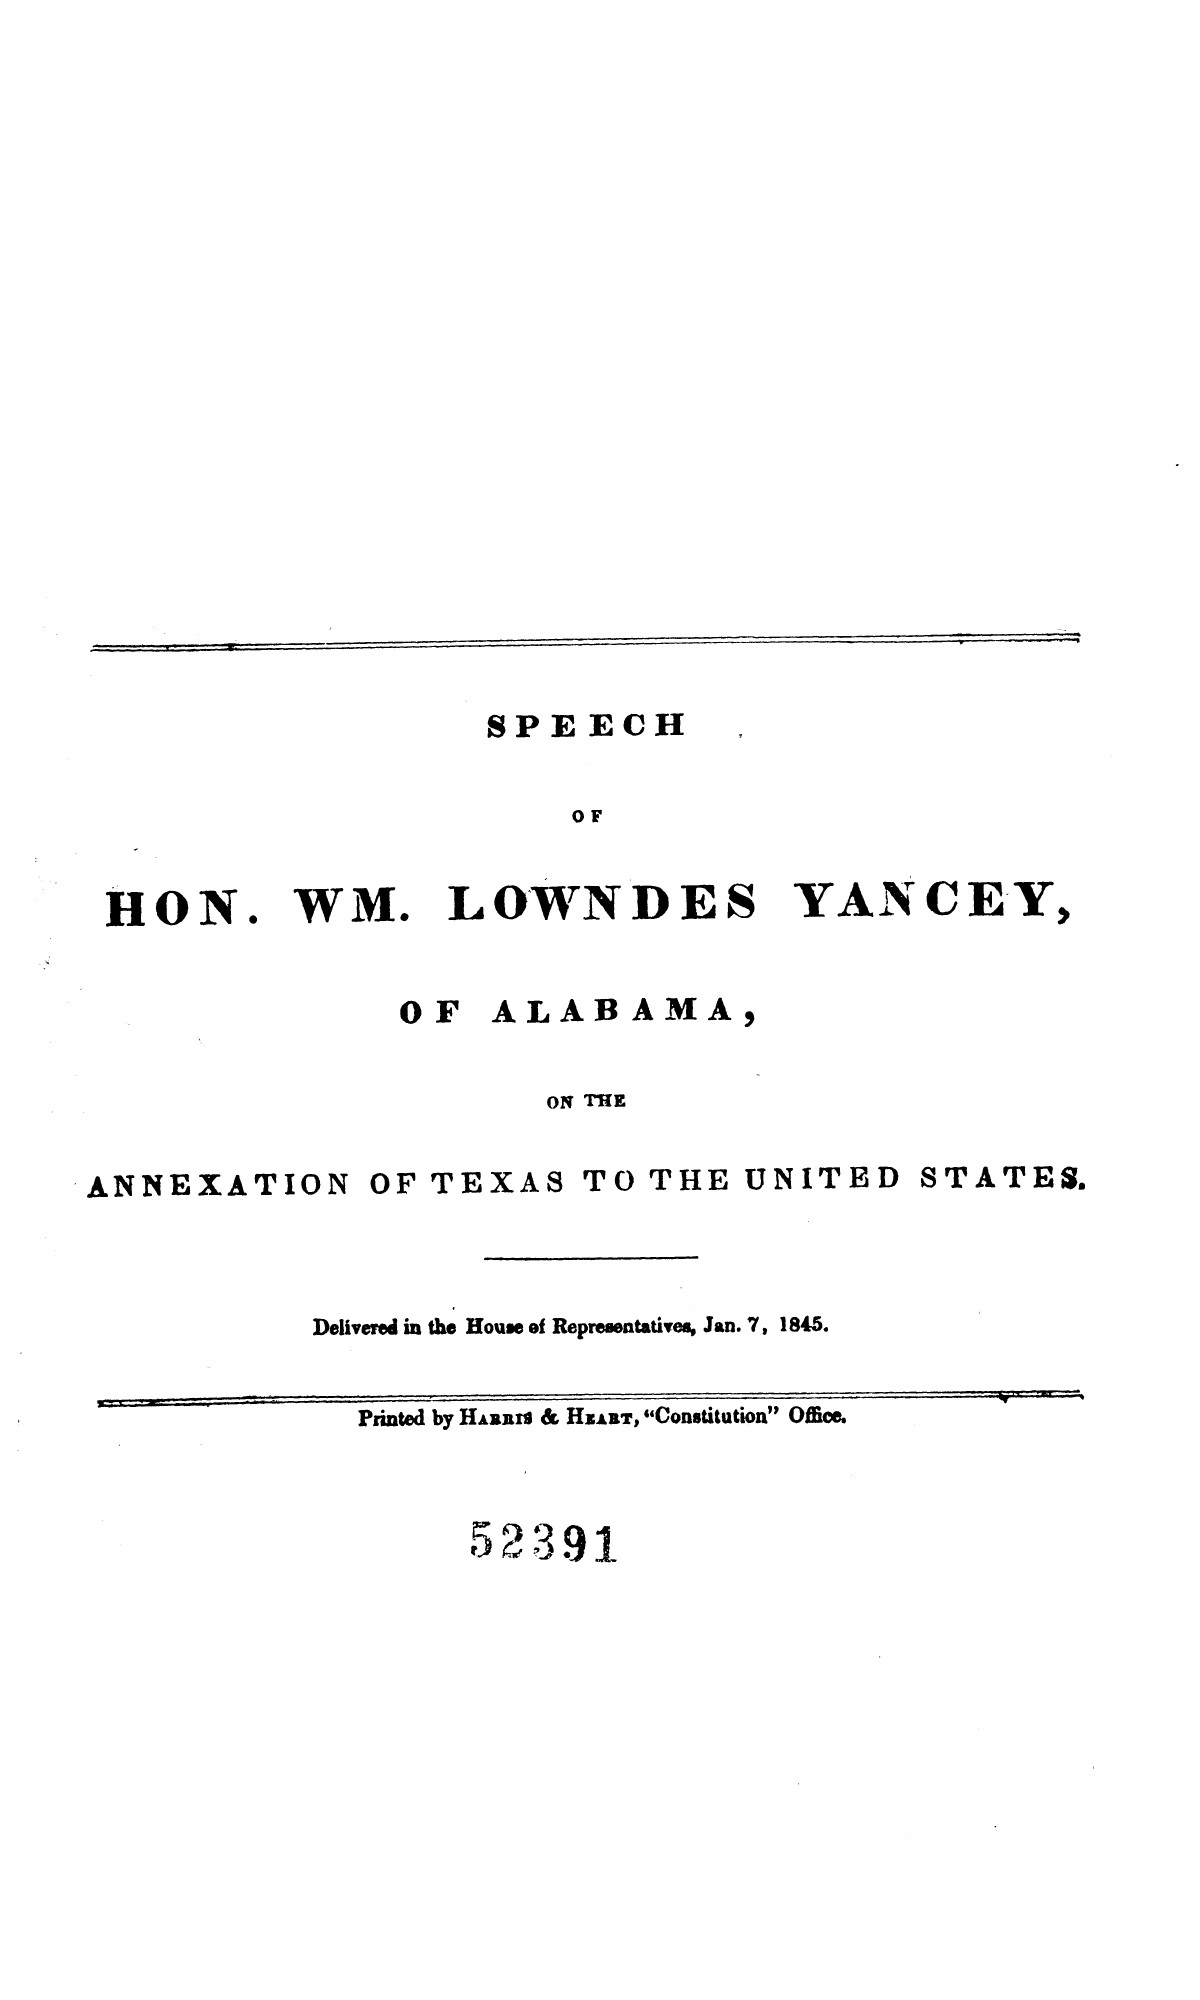 Speech of Hon. Wm. Lowndes Yancey, of Alabama, on the annexation of Texas to the United States, delivered in the House of Representatives, Jan. 7, 1845.
                                                
                                                    [Sequence #]: 1 of 14
                                                